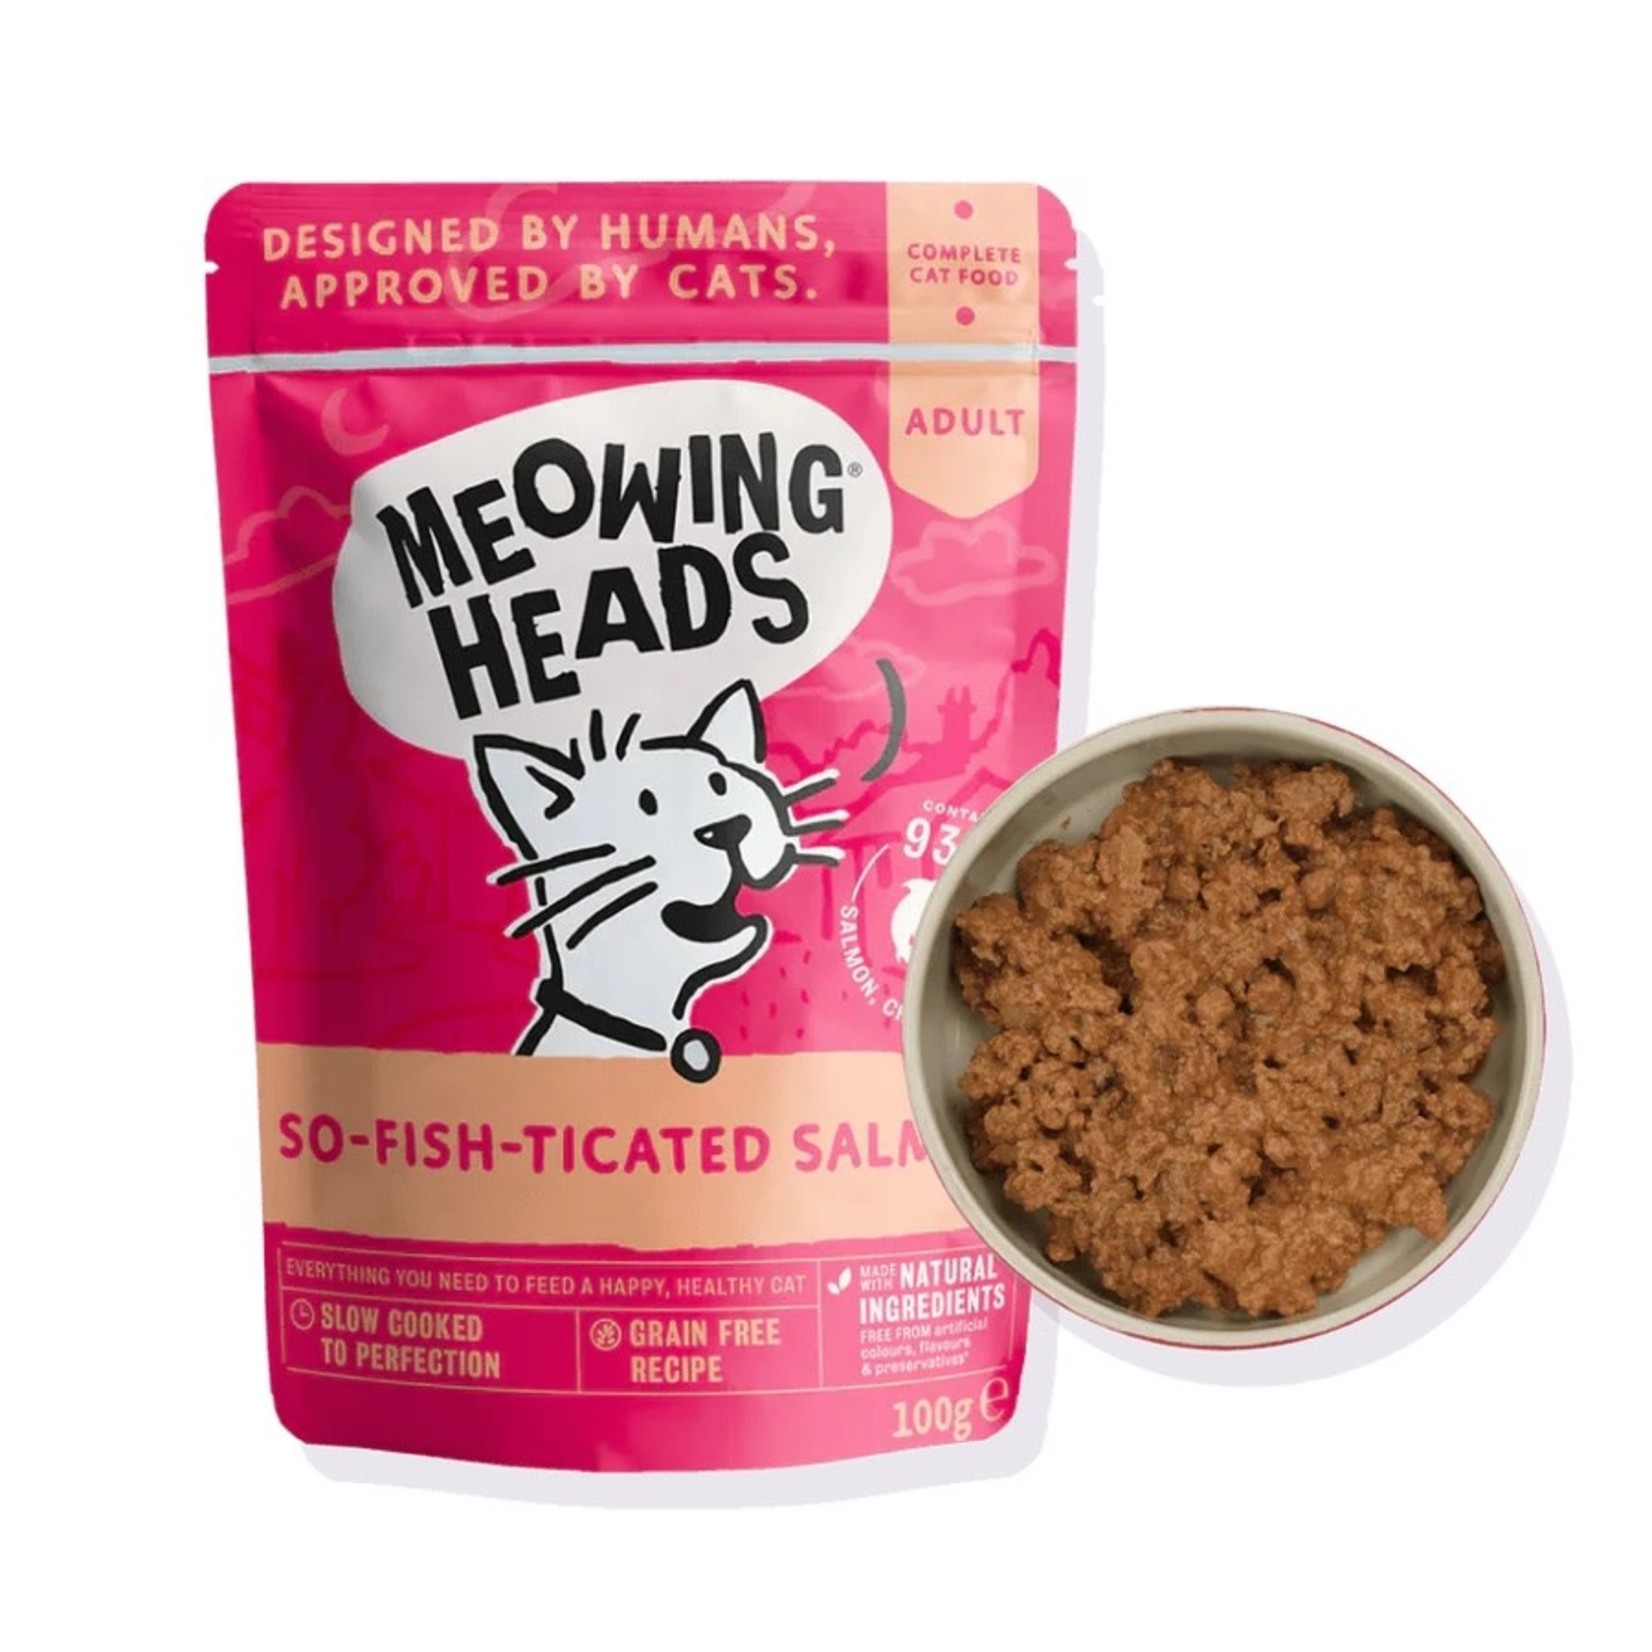 Meowing Heads So-fish-ticated Salmon Adult Cat Wet Food, 10 x 100g